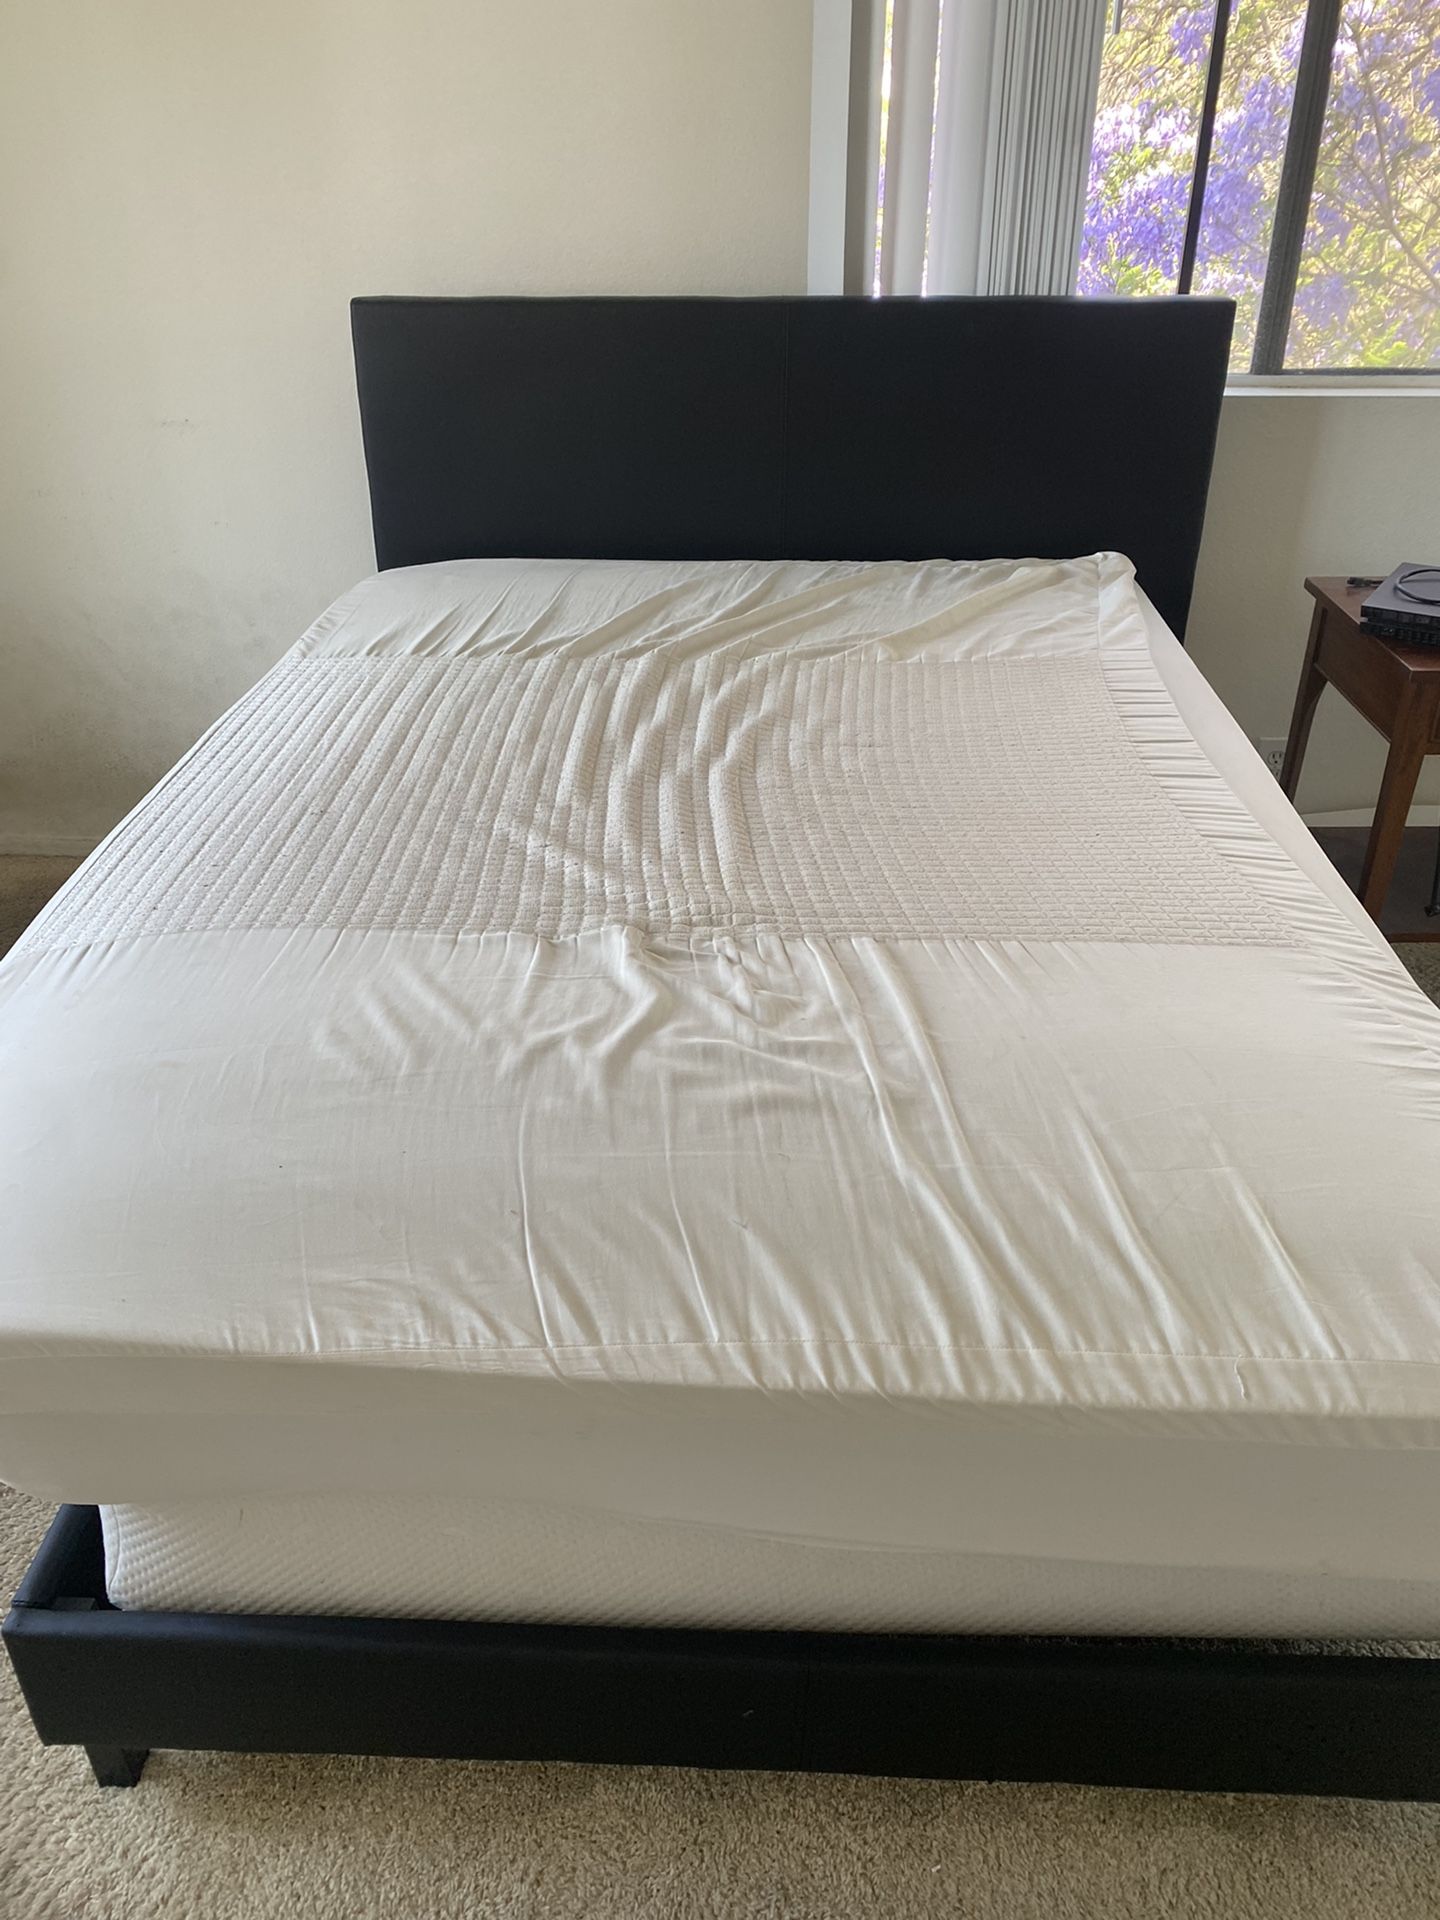 Full Sizes Mattress, Box Spring and Bed Frame